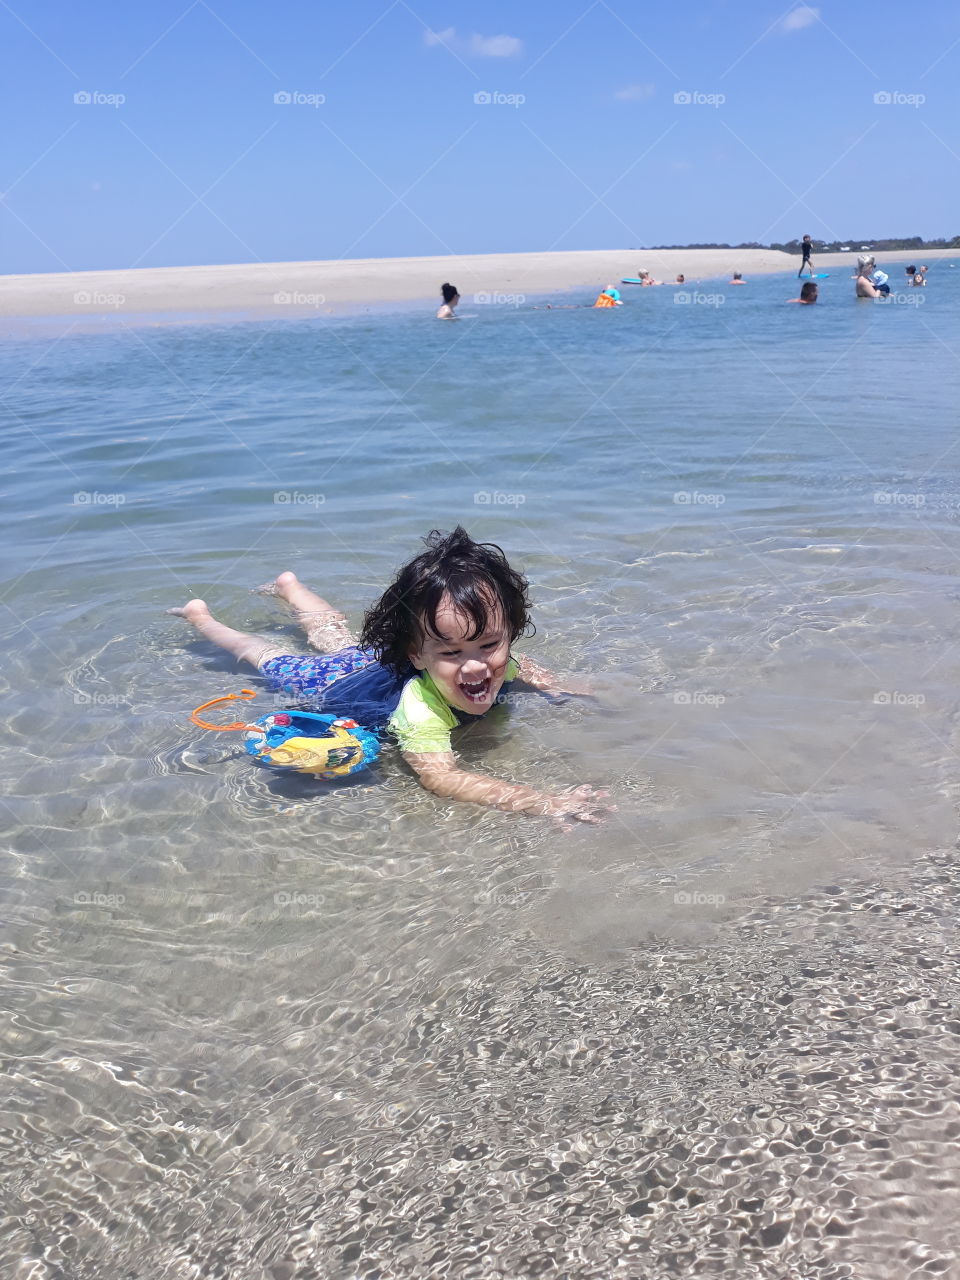 priceless moment of my little one@ Elliot heads ,Qld